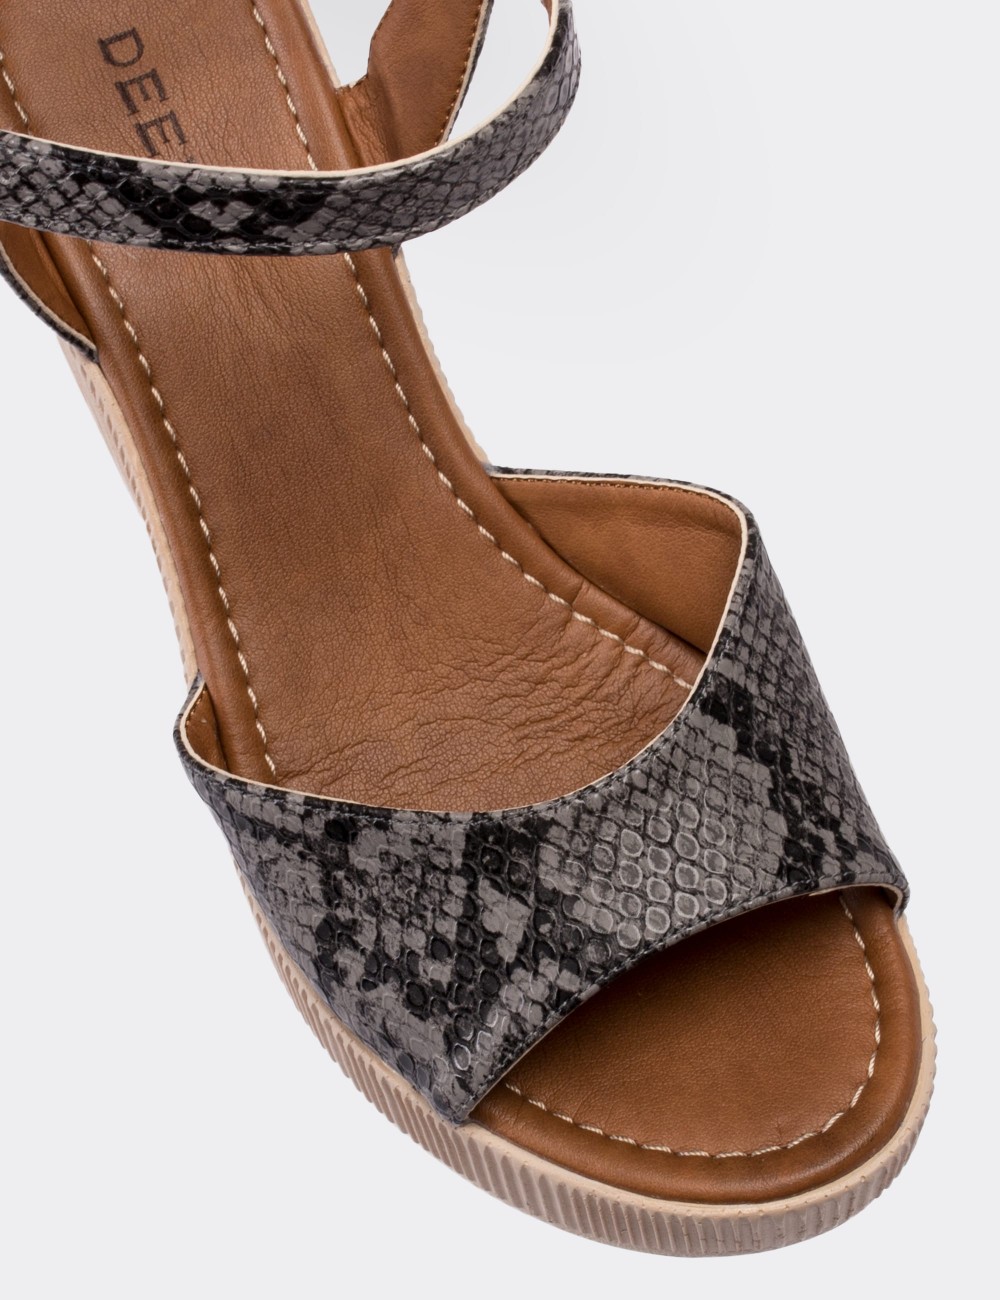 Gray Leather Sandals - 02129ZGRIP01